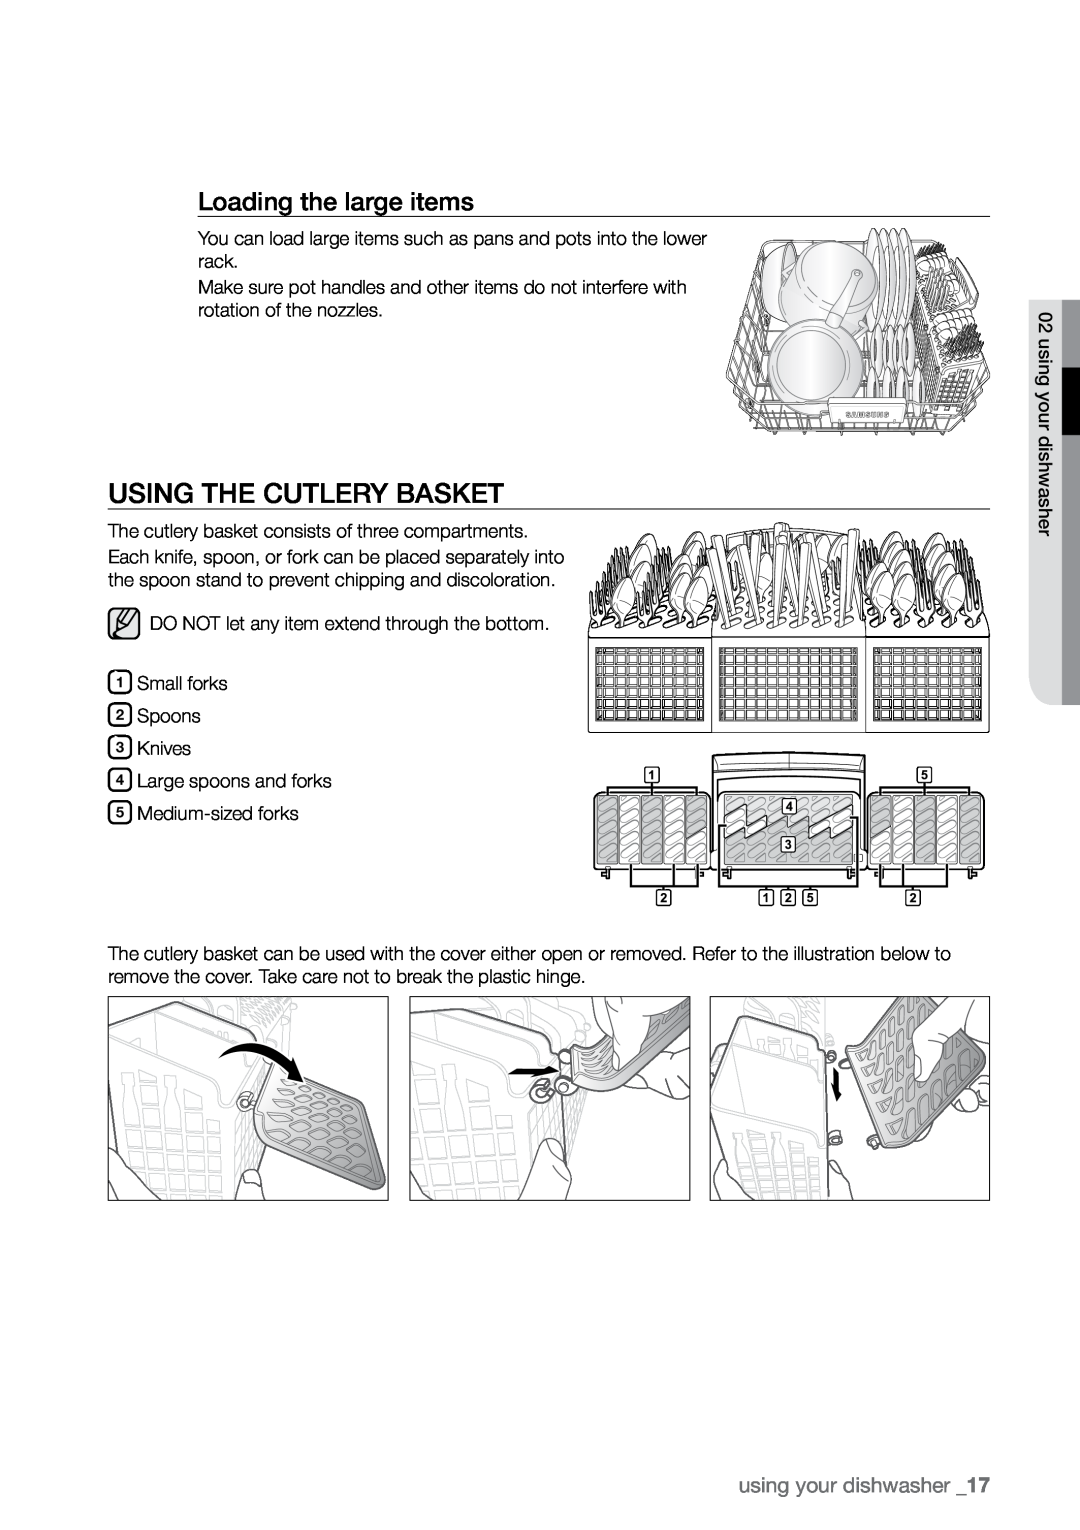 Samsung DMR78 manual Using the cutlery basket, Loading the large items, using your dishwasher 